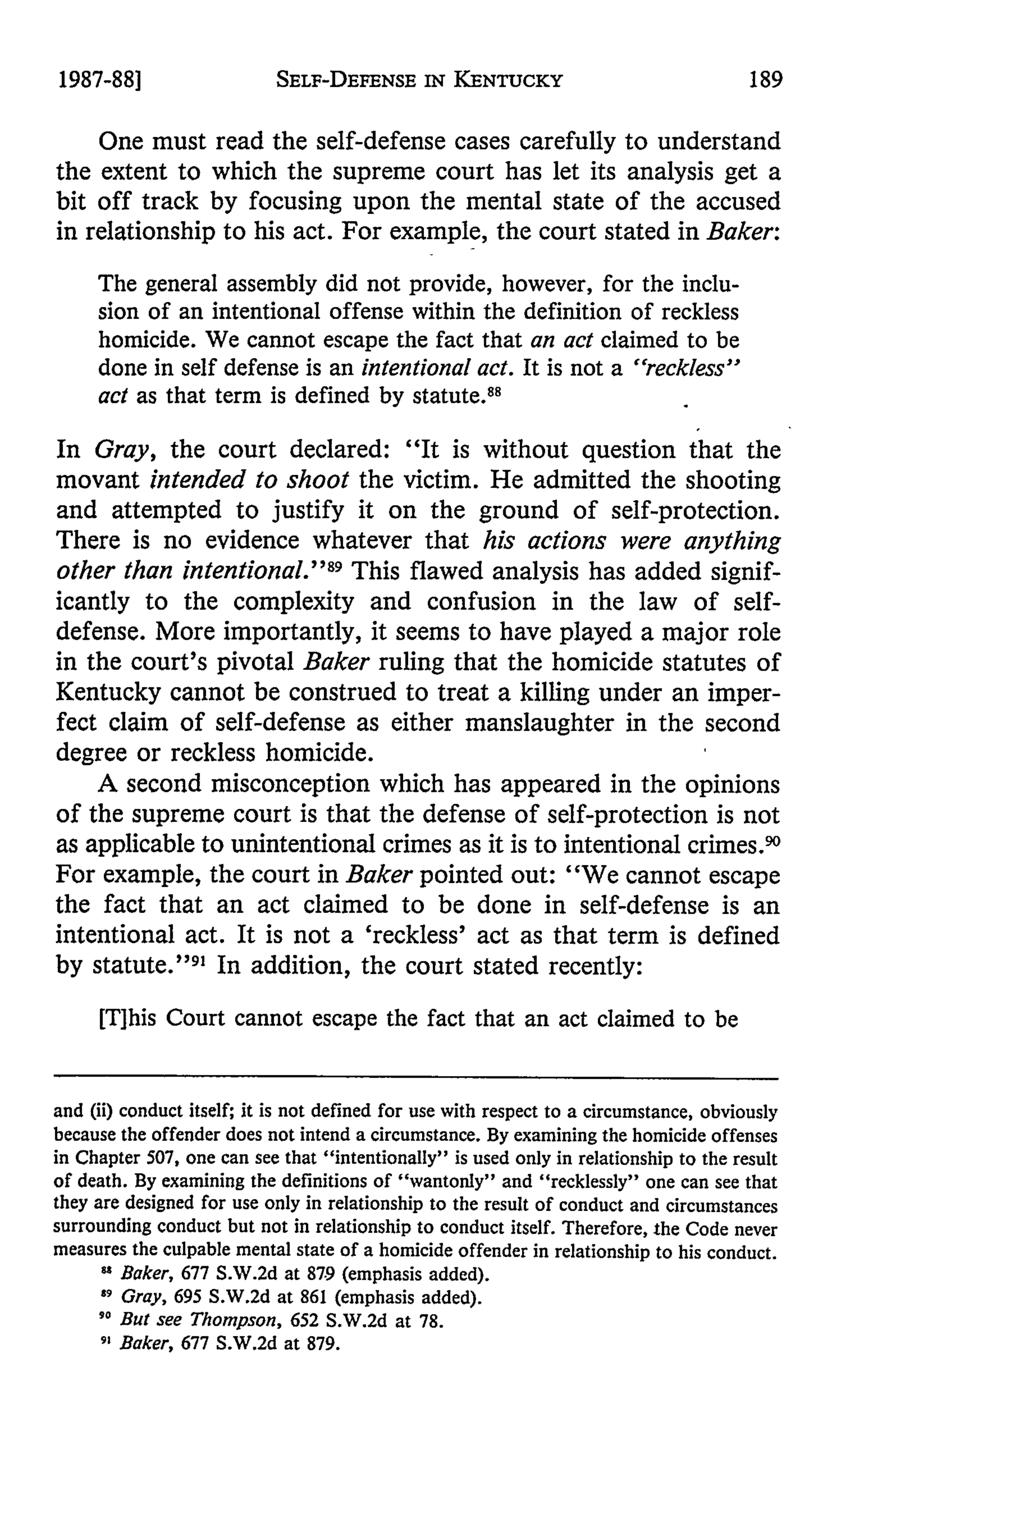 1987-88] SELF-DEFENSE IN KENTUCKY One must read the self-defense cases carefully to understand the extent to which the supreme court has let its analysis get a bit off track by focusing upon the